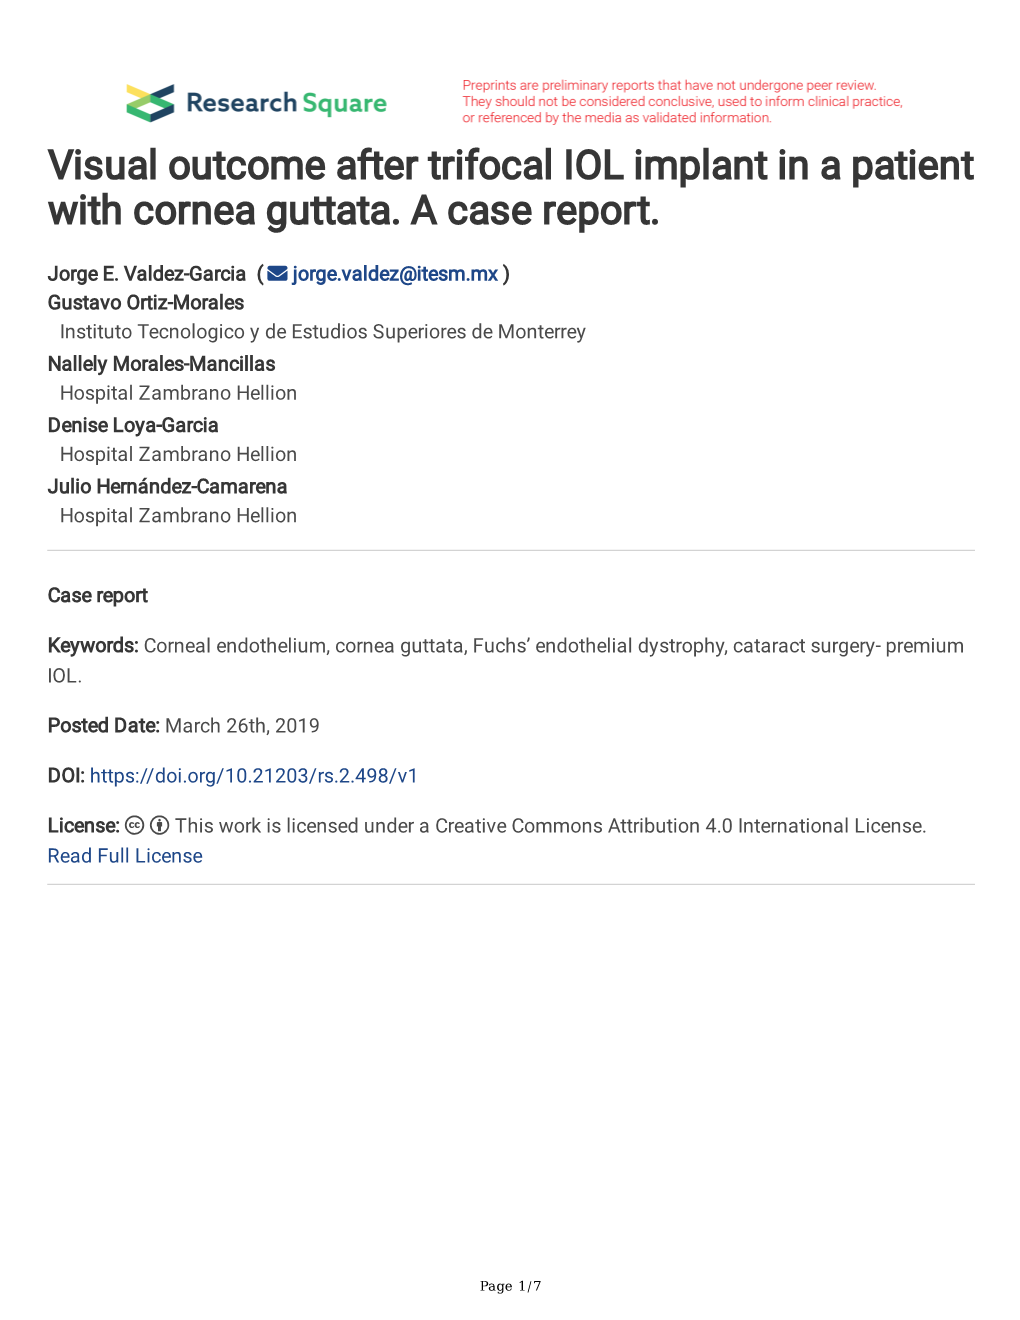 Visual Outcome After Trifocal IOL Implant in a Patient with Cornea Guttata